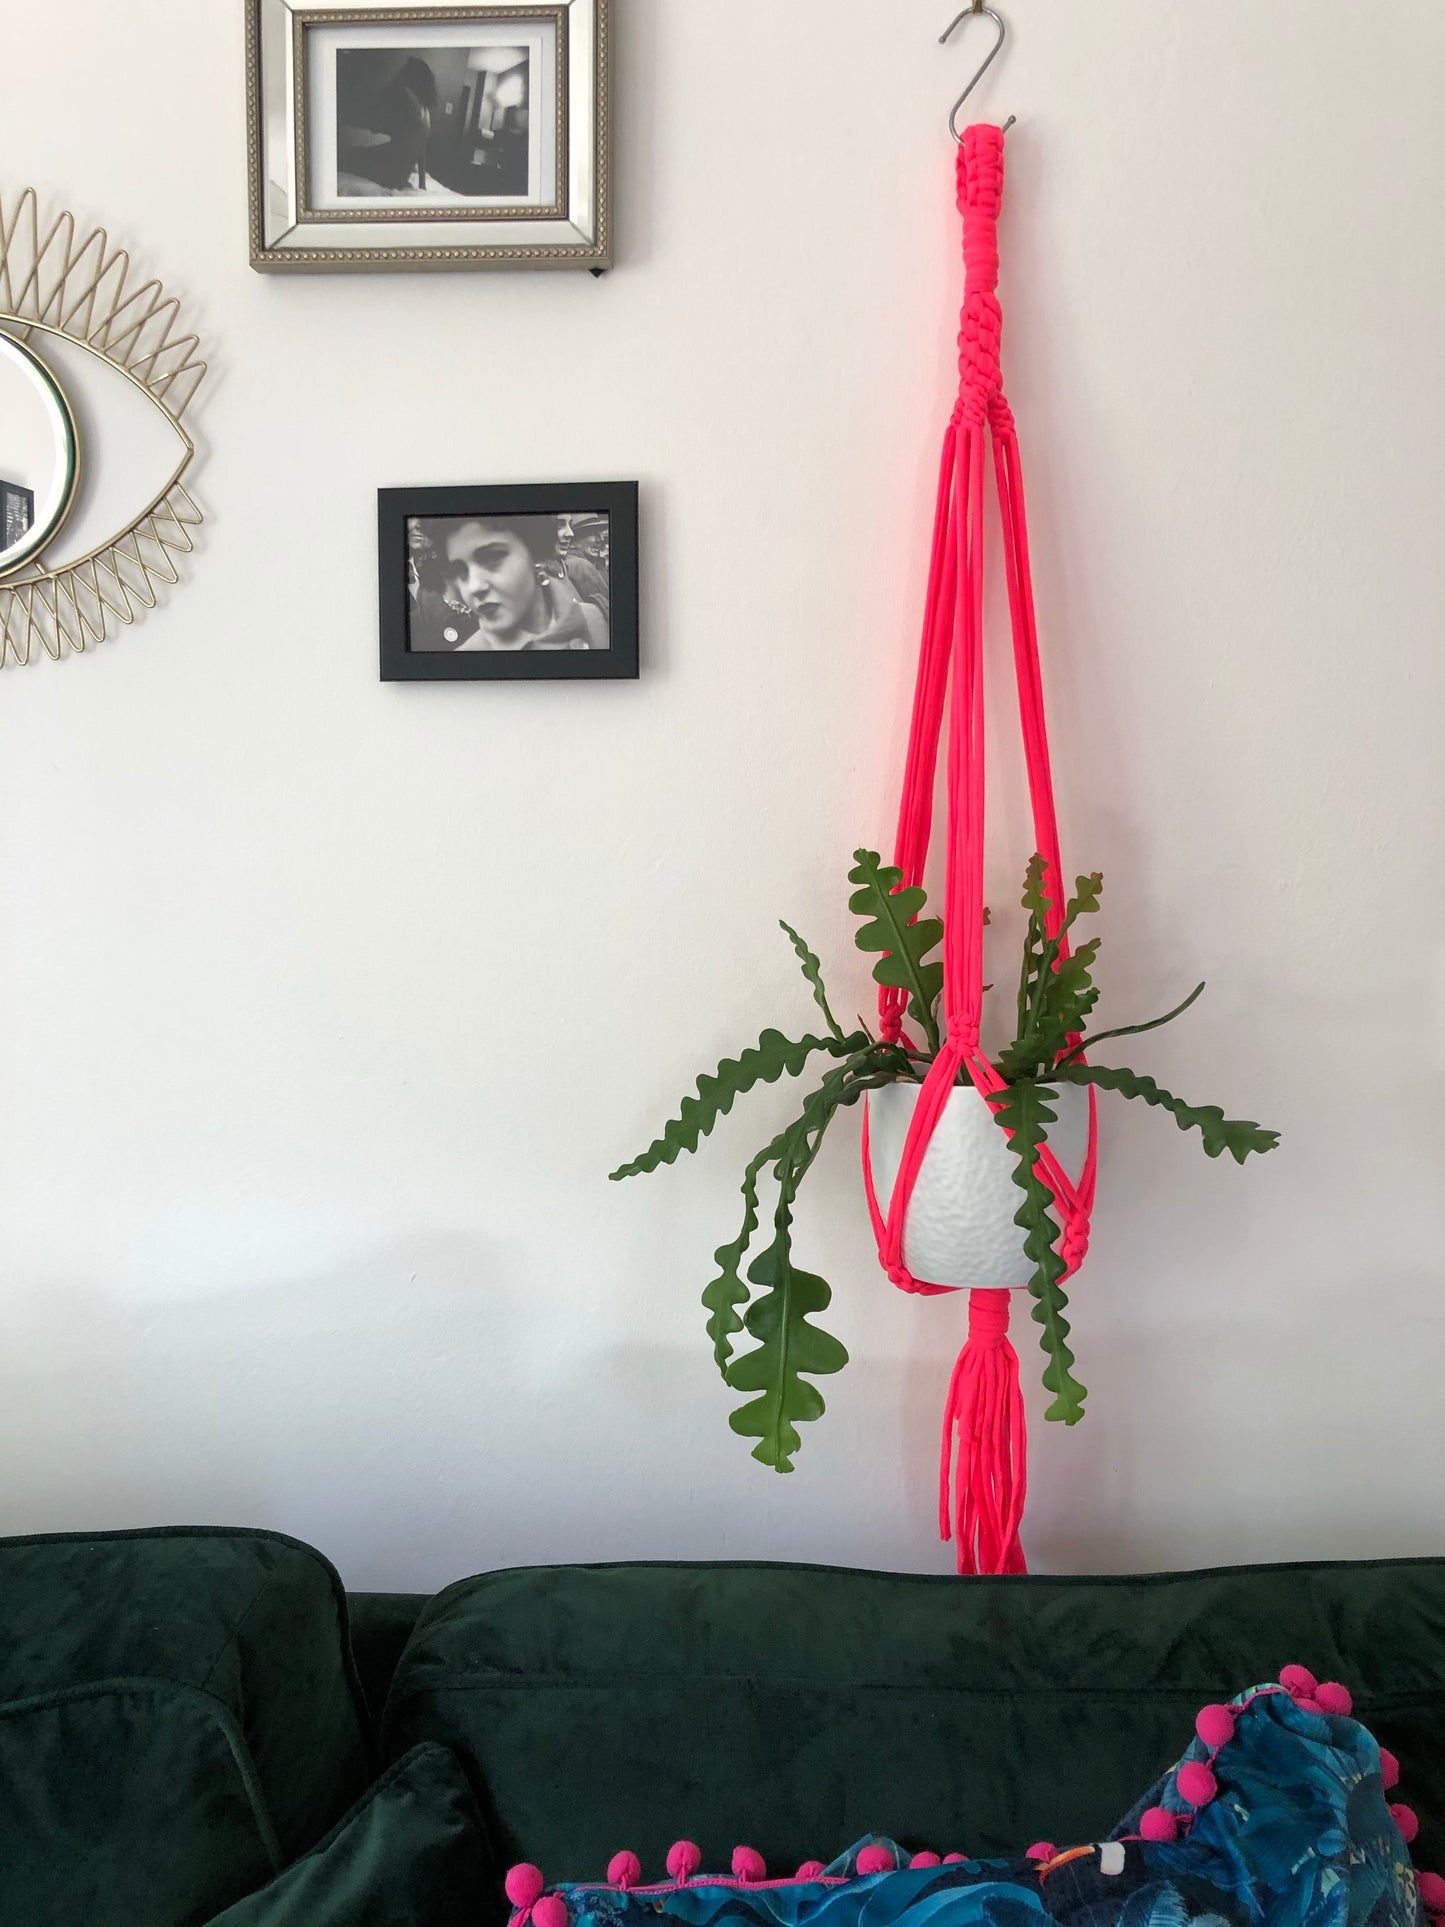 Buy Online Premium Quality and Beautiful The OG Neon Pink Macrame Hanger Twisted - Hotpinkhangers